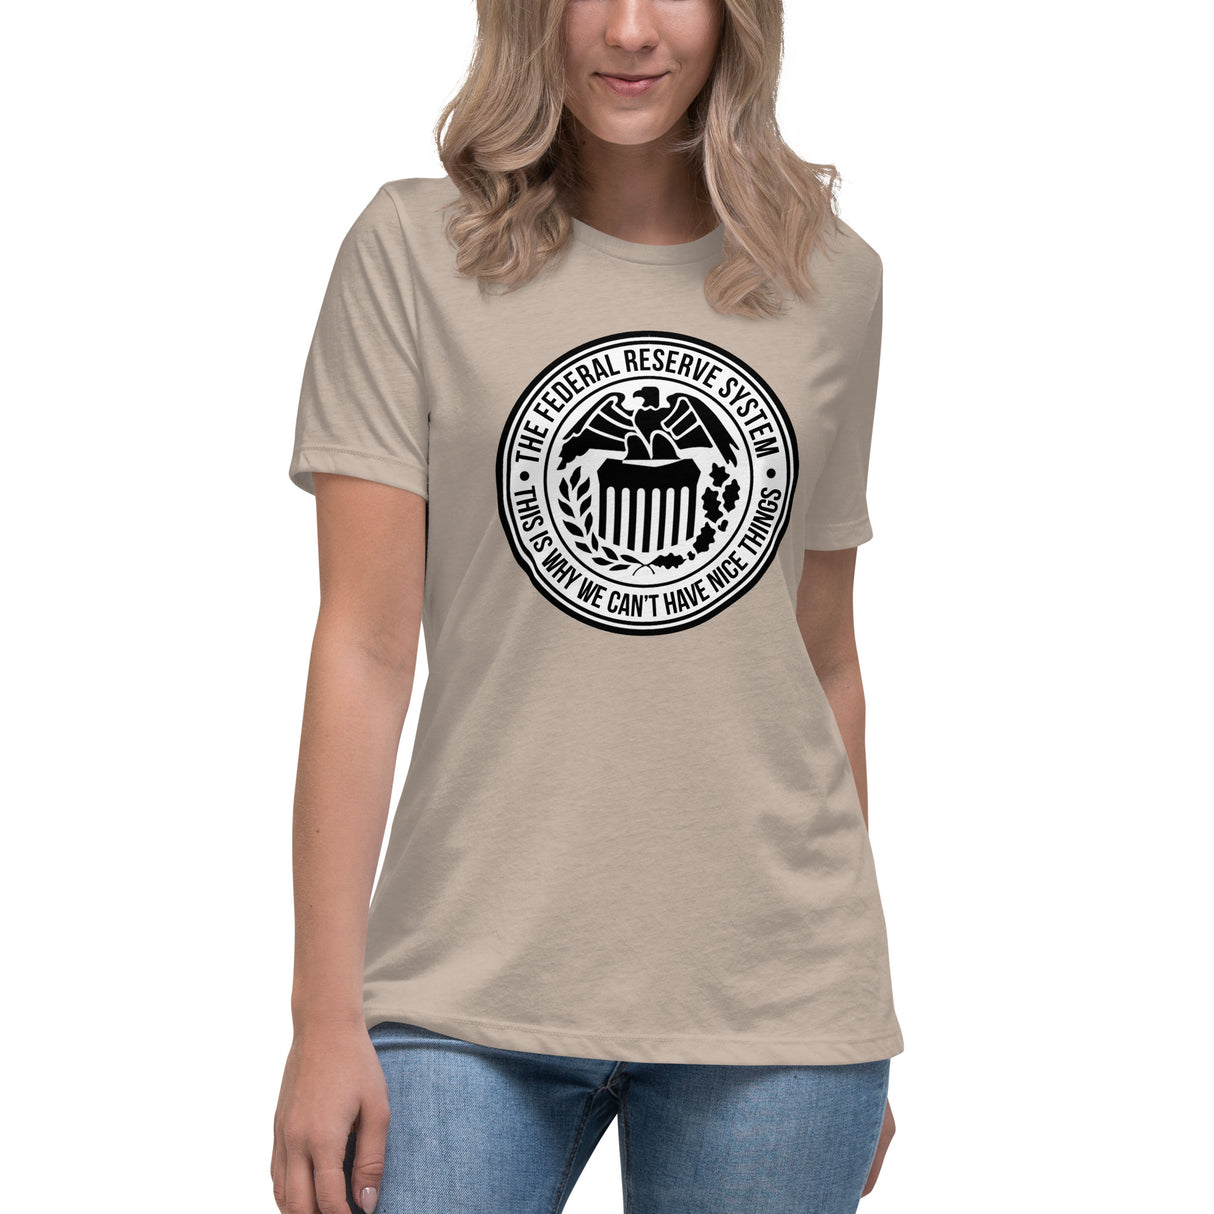 This is Why We Can't Have Nice Things Women's Shirt - Libertarian Country